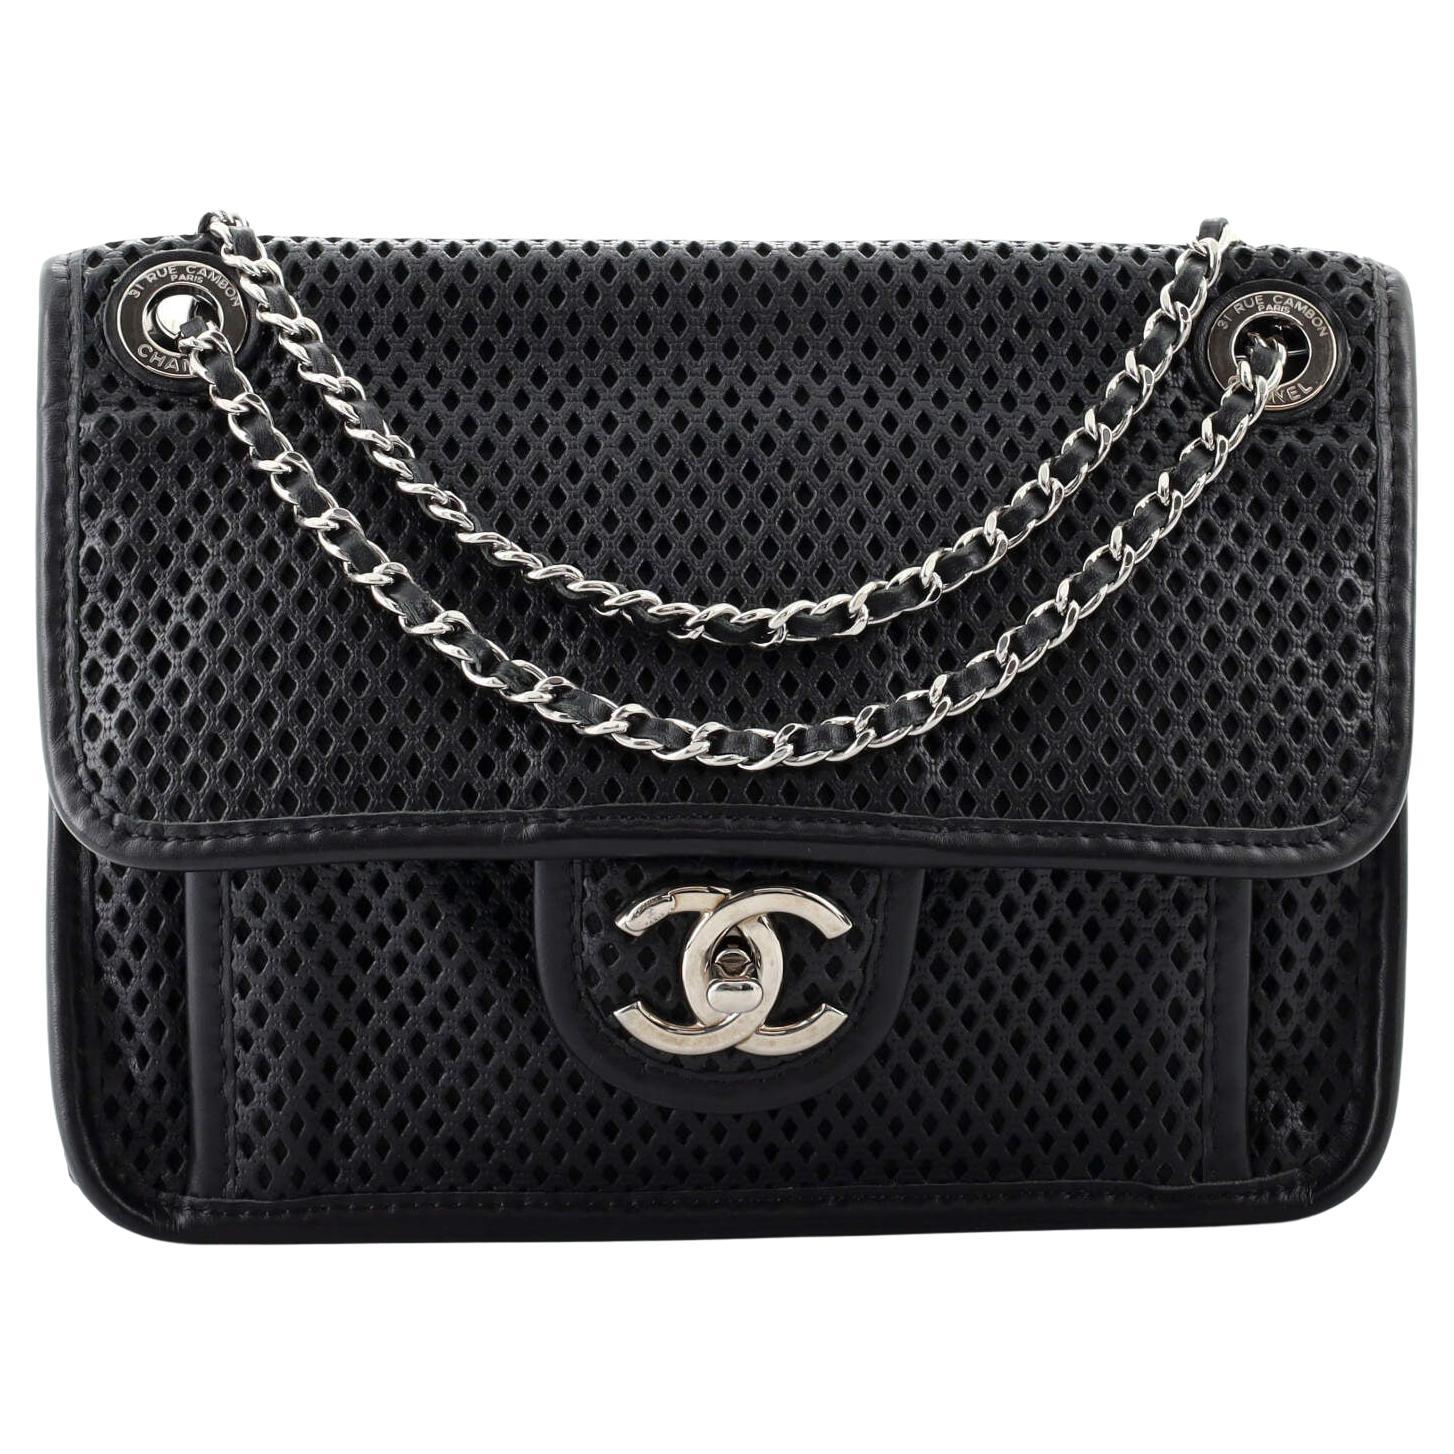 Chanel White Perforated Leather Shopper Deauville Bag at 1stDibs